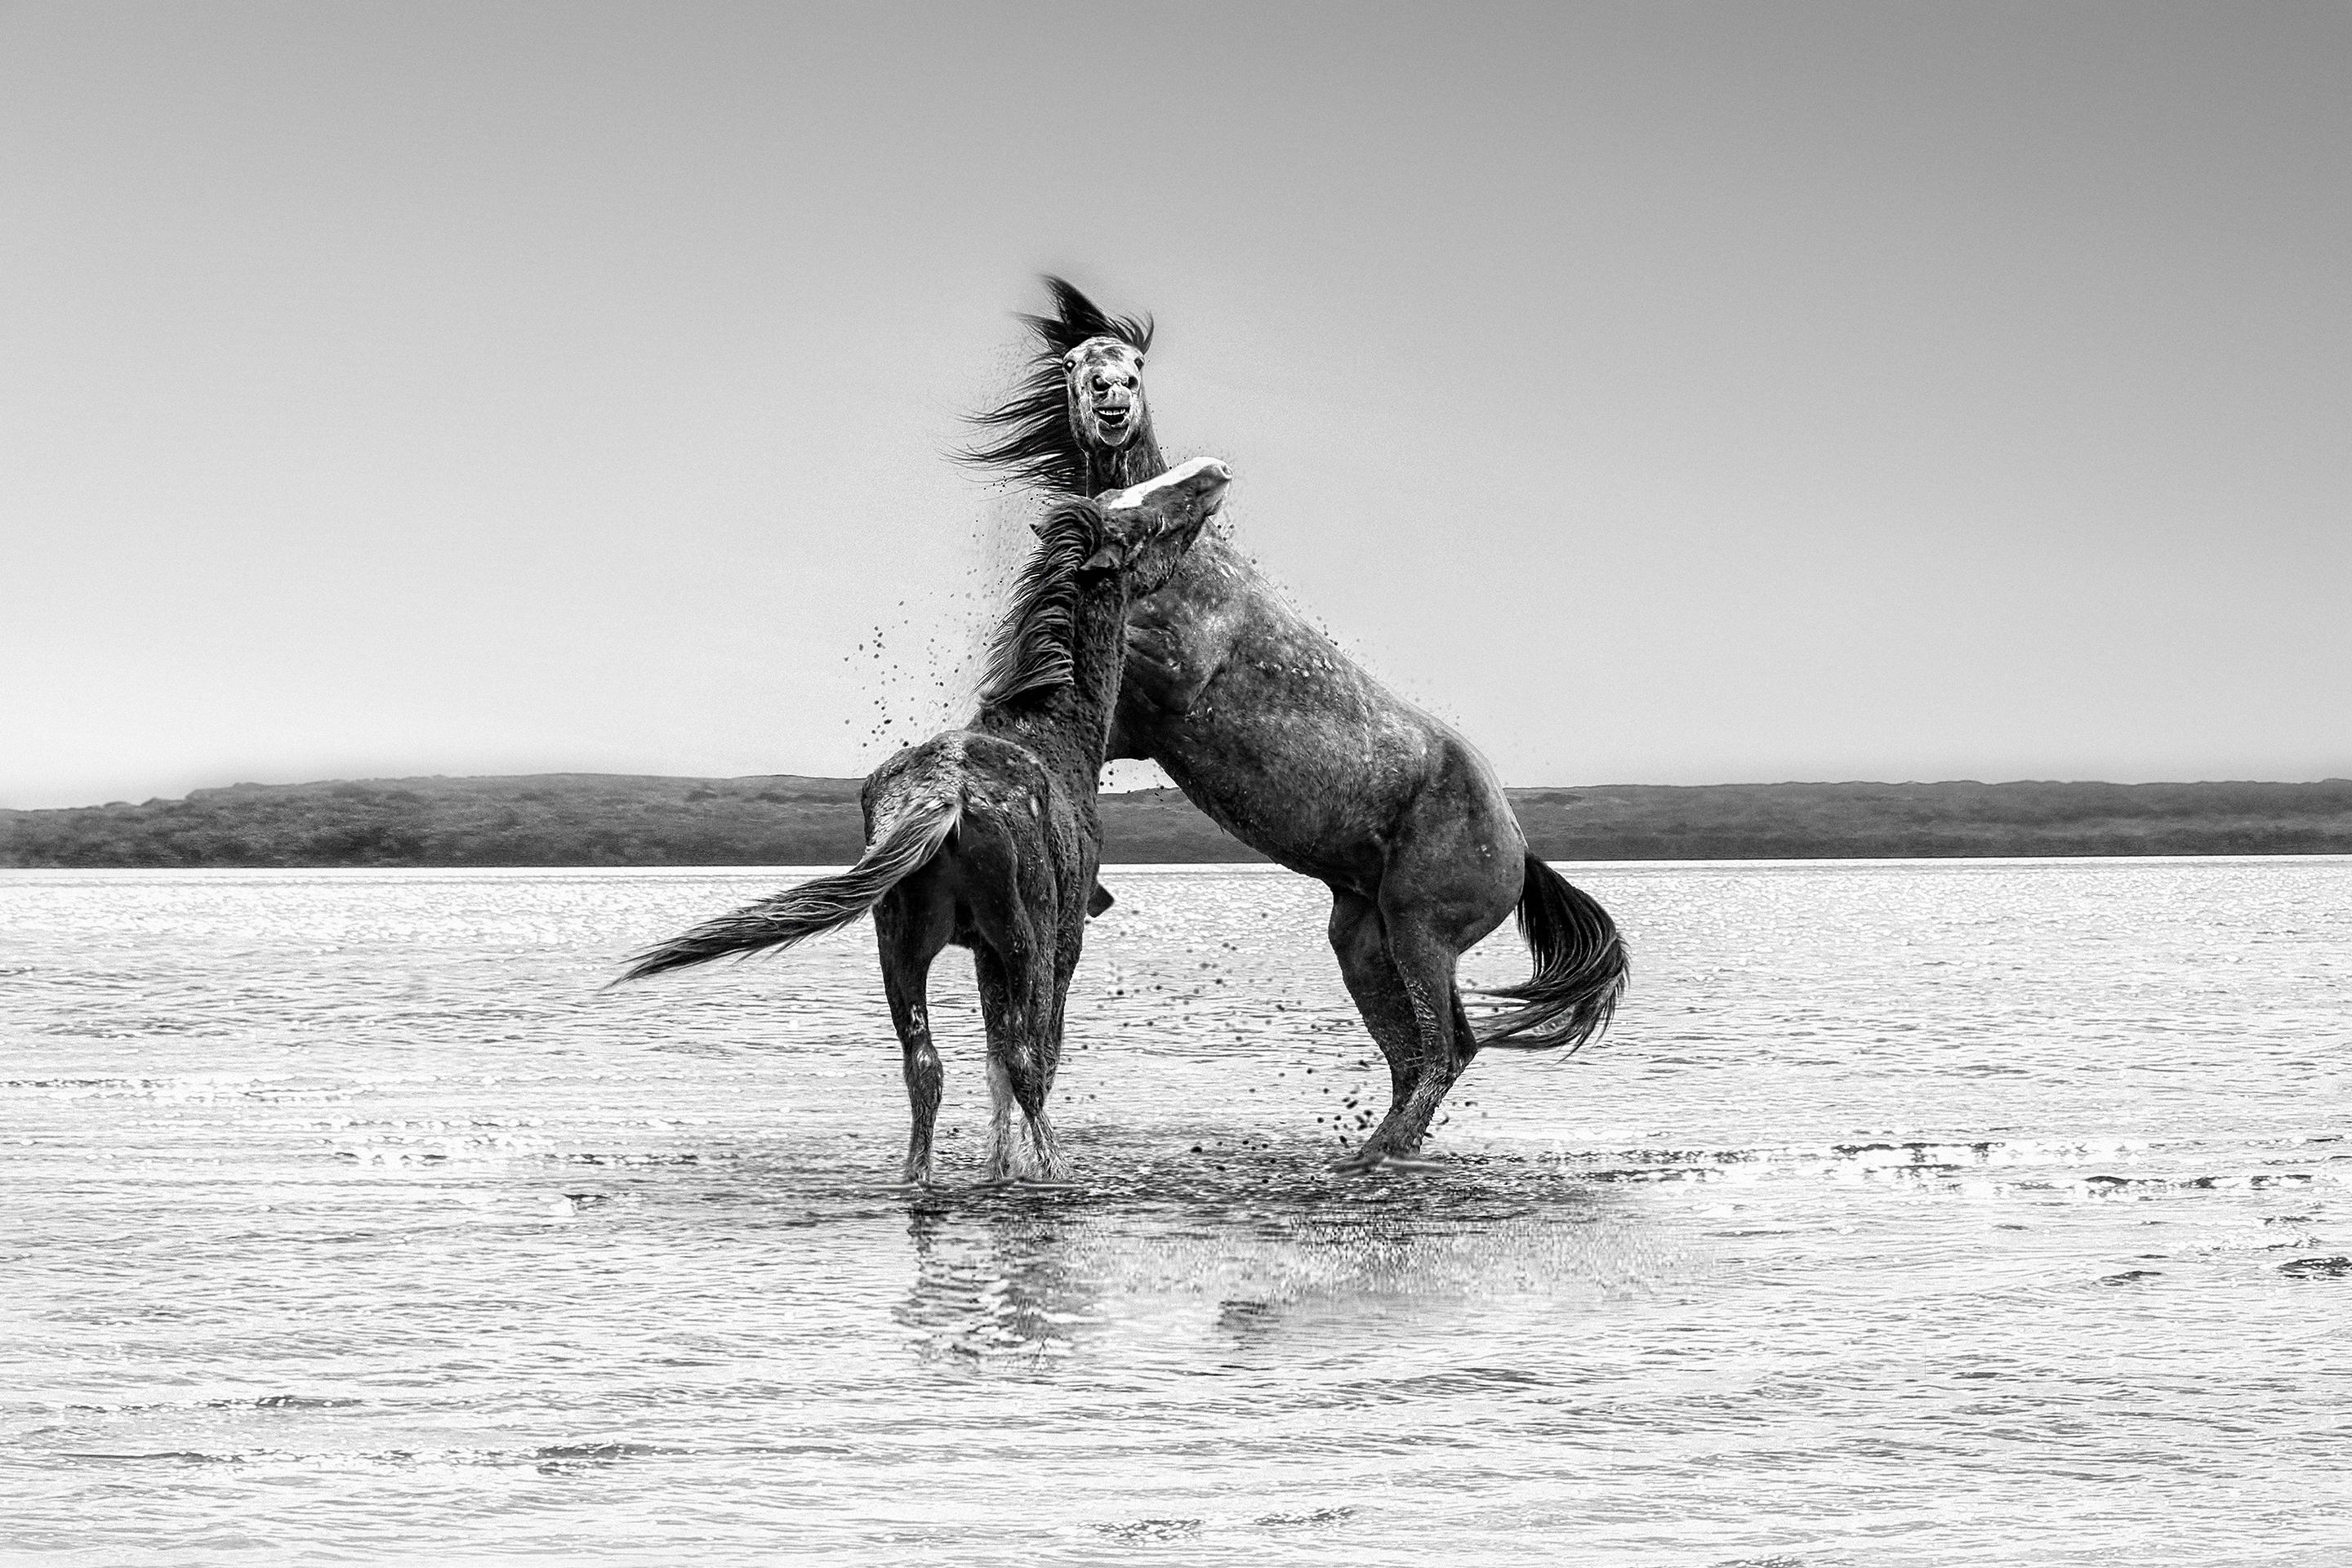 Shane Russeck Animal Print - "The Pugilist" - 36x48 Black and White Photography of Wild Horses, Mustangs 